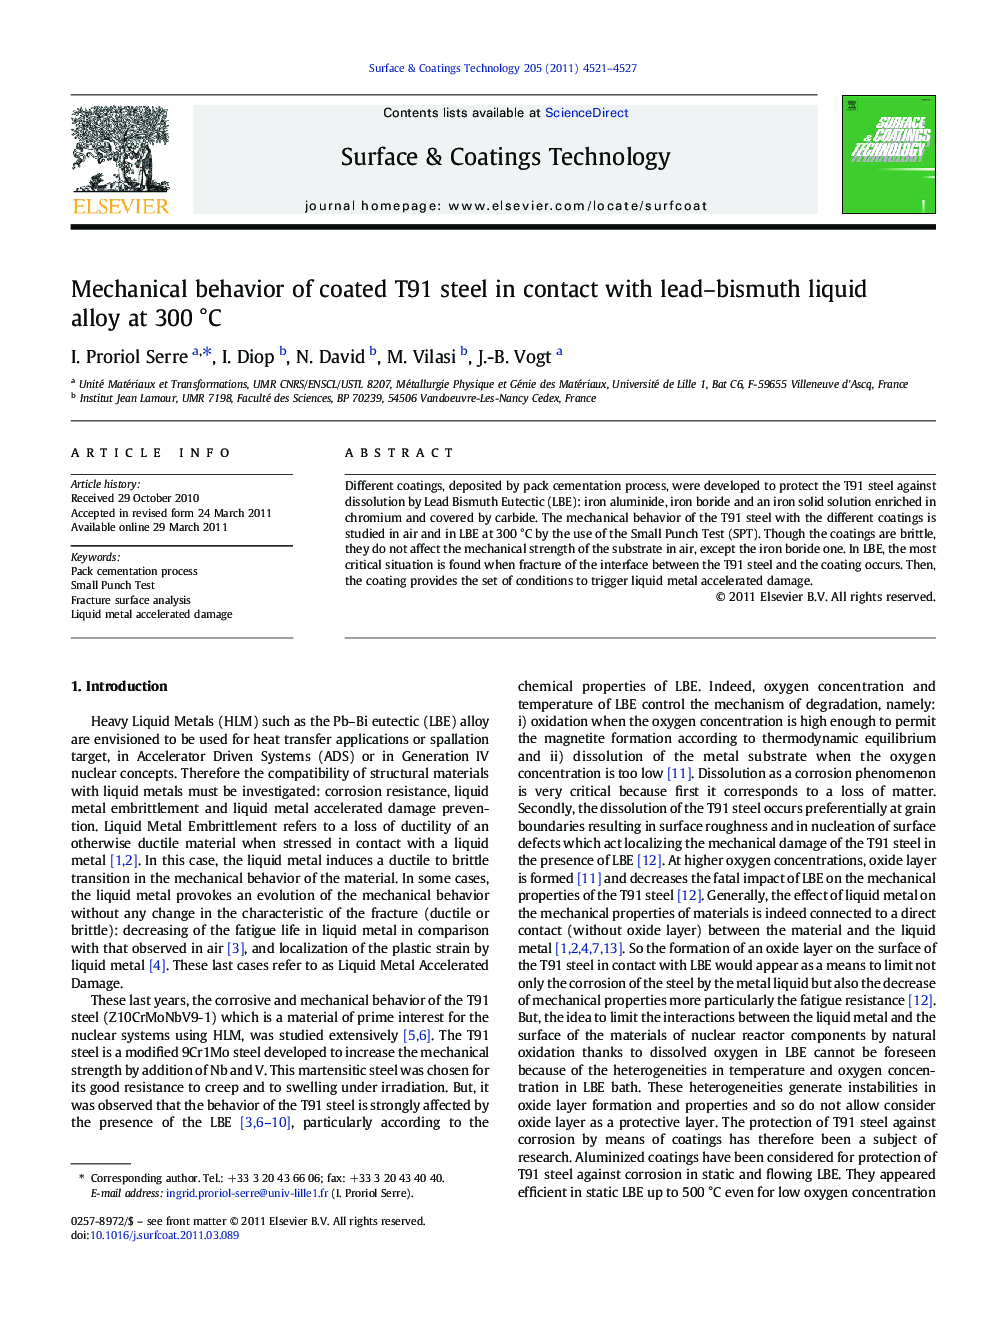 Mechanical behavior of coated T91 steel in contact with lead-bismuth liquid alloy at 300Â Â°C